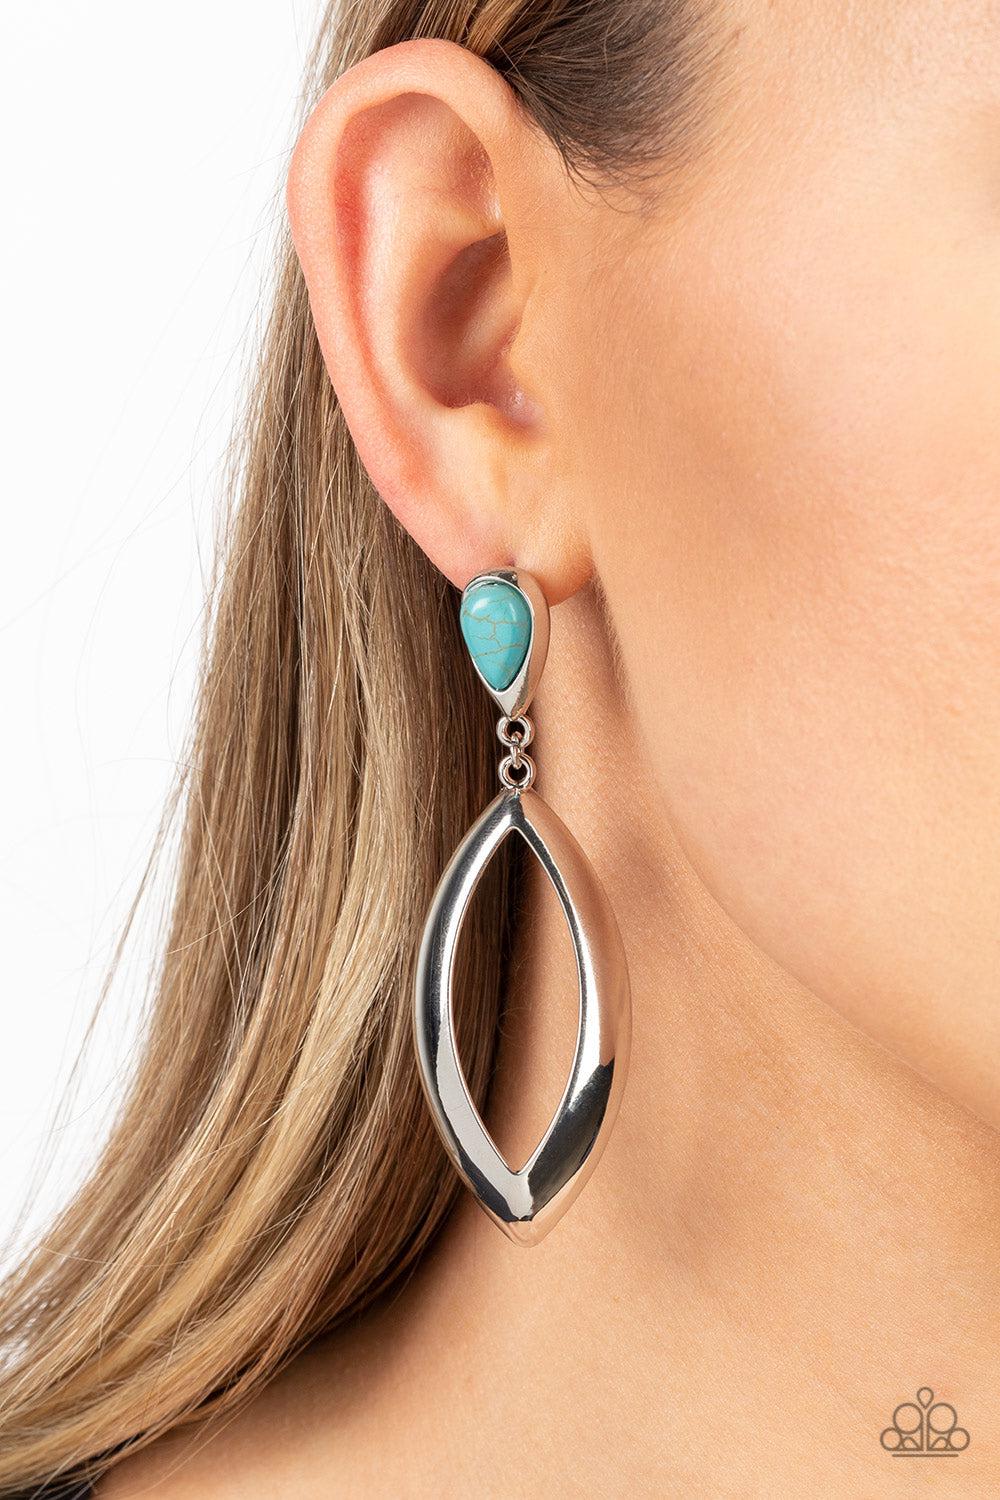 Artisan Anthem Turquoise Blue Stone &amp; Silver Earrings - Paparazzi Accessories-on model - CarasShop.com - $5 Jewelry by Cara Jewels